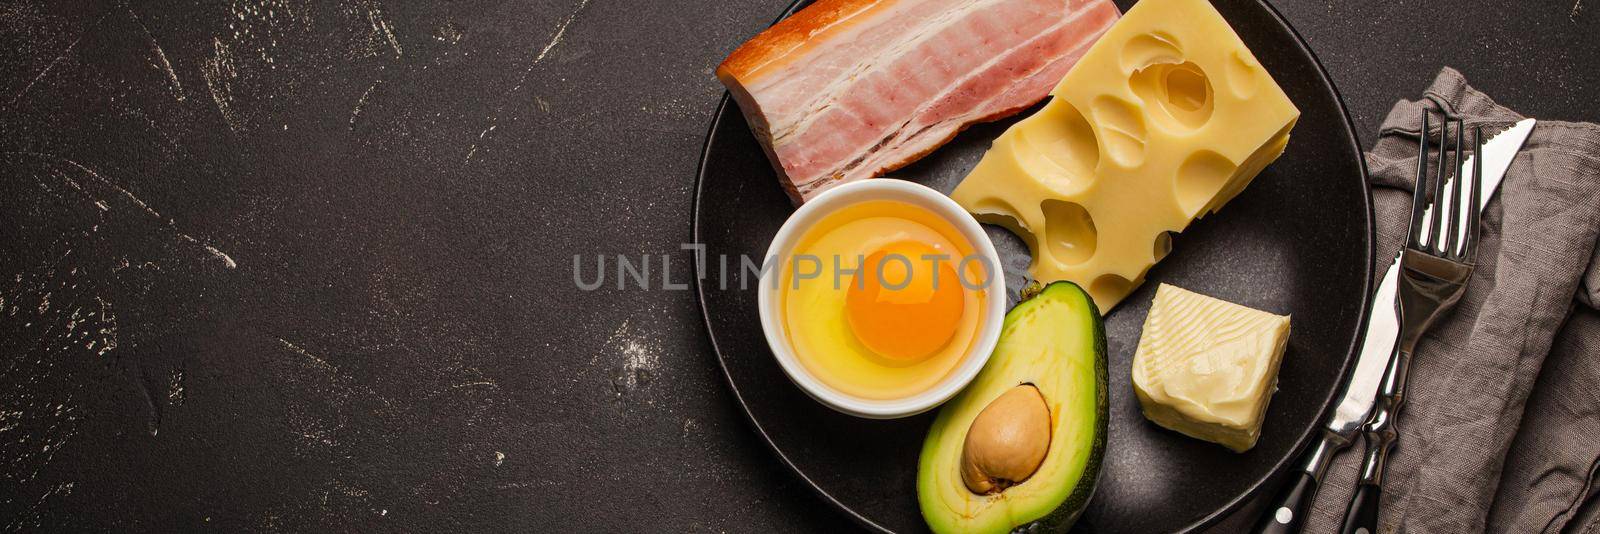 Foods for keto diet on black plate on dark background copy space by its_al_dente